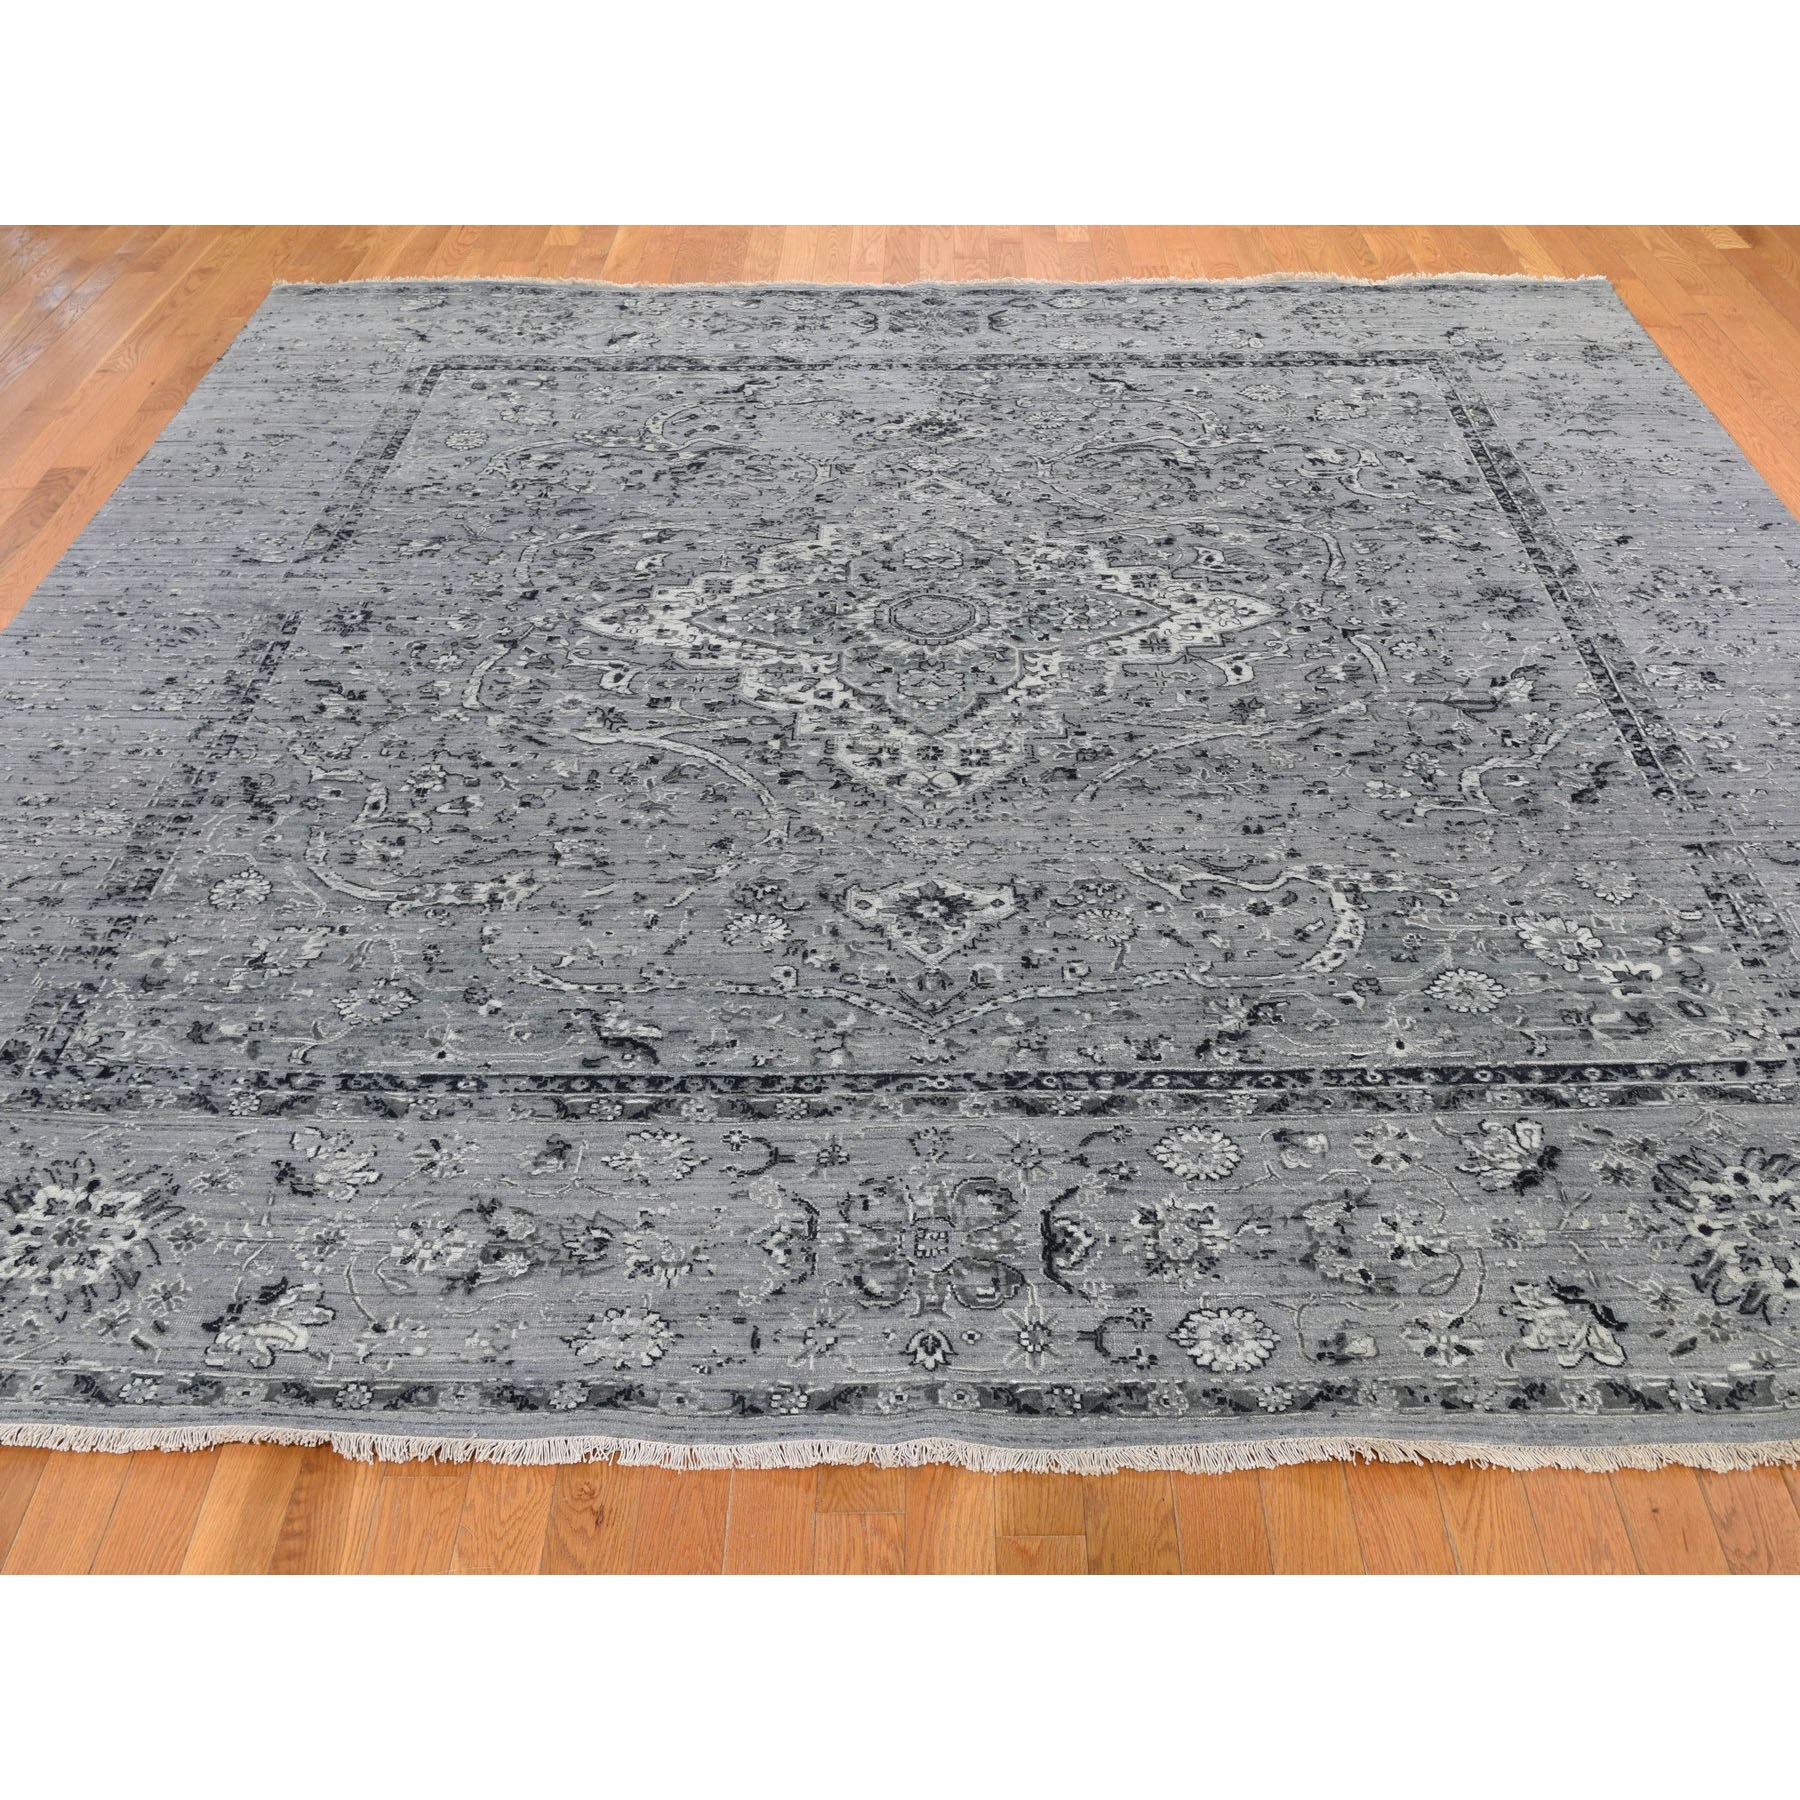 10'x10' Square Gray Broken Persian Erased Design Pure Silk With Textured Wool Hand Woven Oriental Rug 